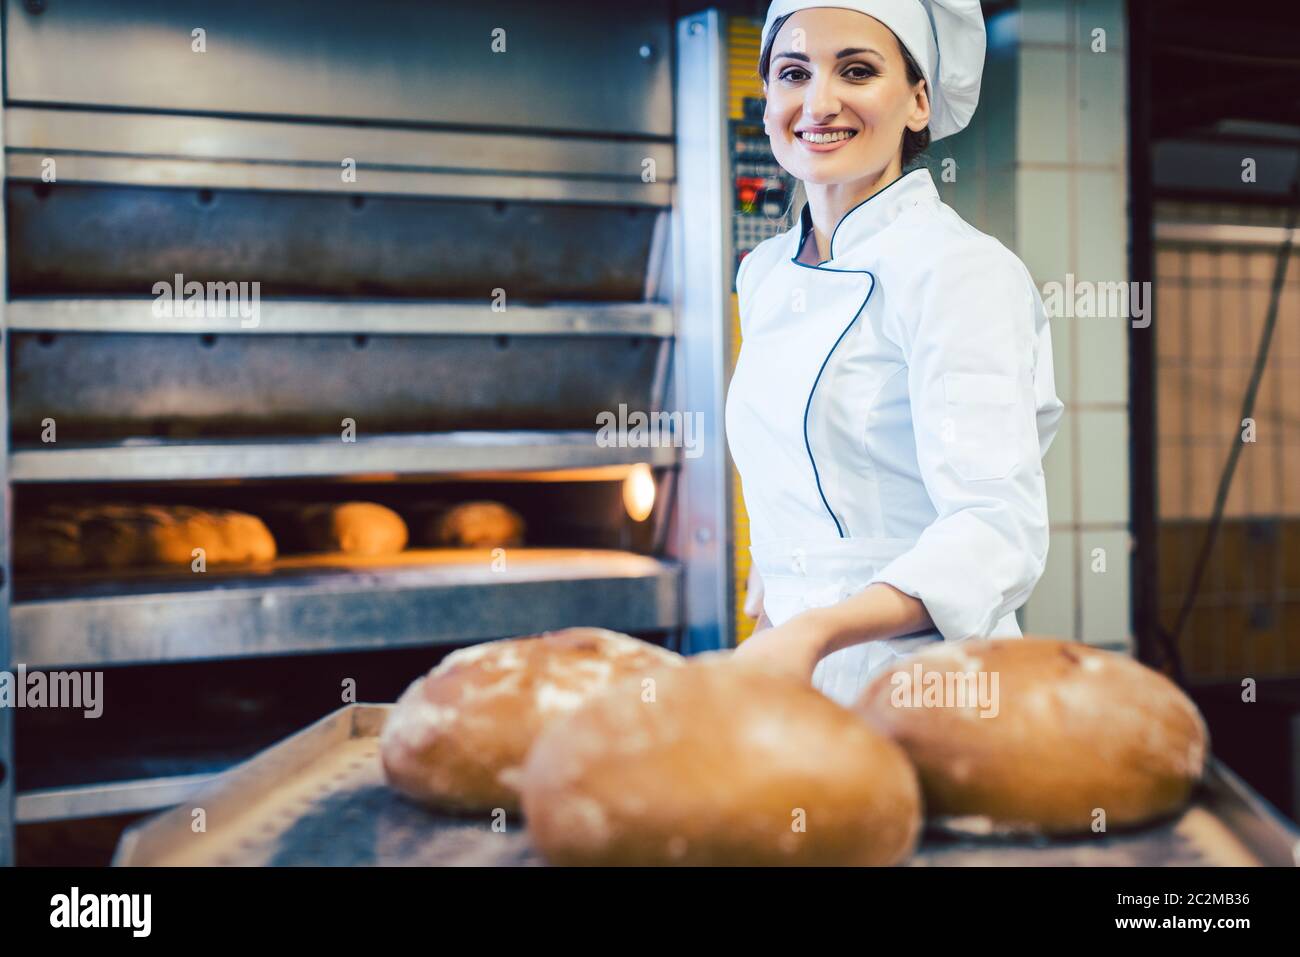 https://c8.alamy.com/comp/2C2MB36/baker-woman-showing-freshly-baked-bread-on-shovel-one-can-almost-sniff-the-freshness-2C2MB36.jpg